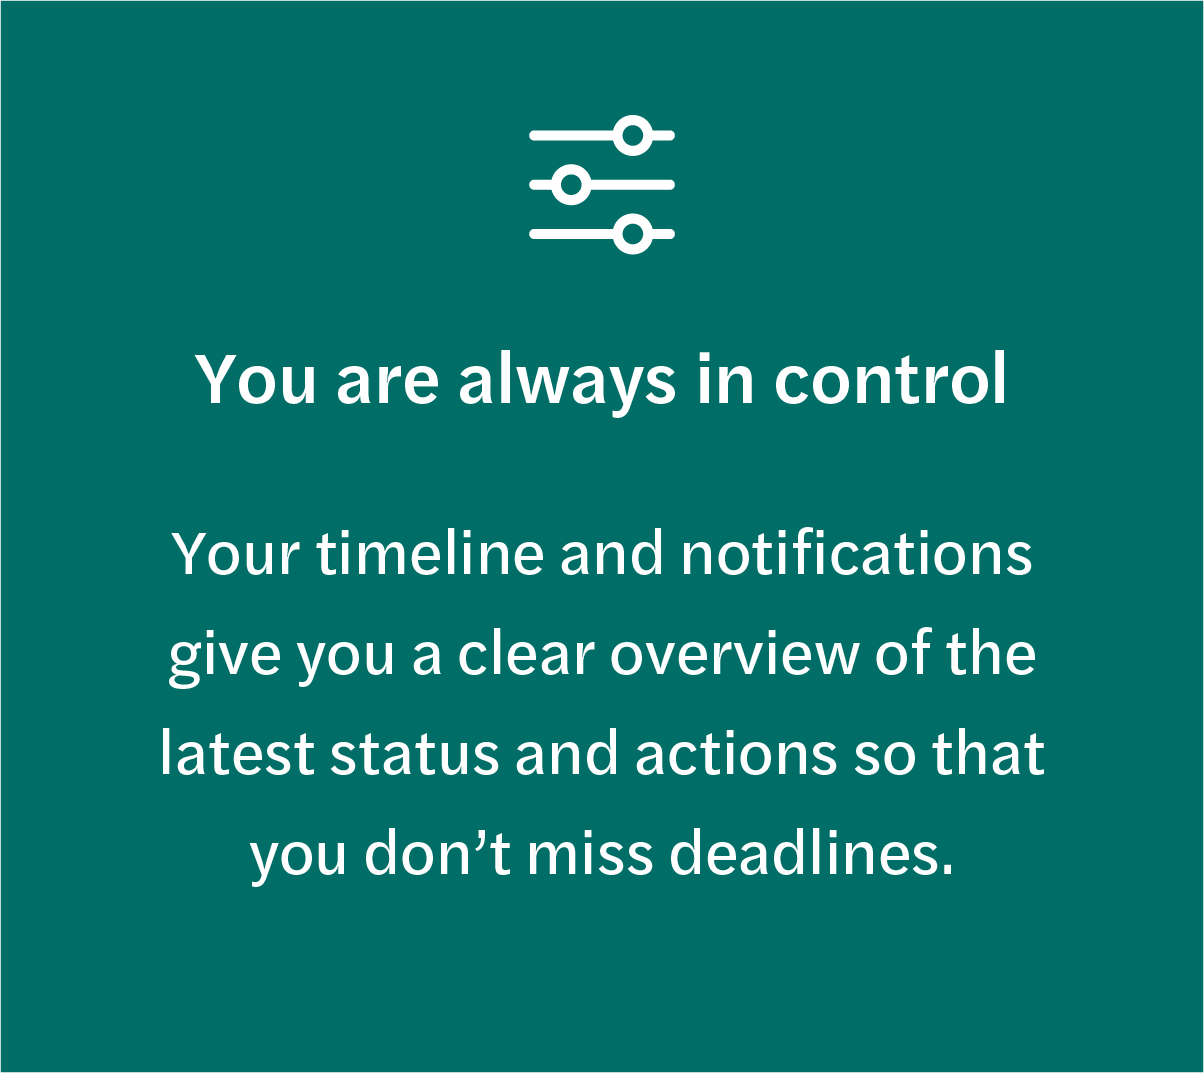 You are always in control _ Signals